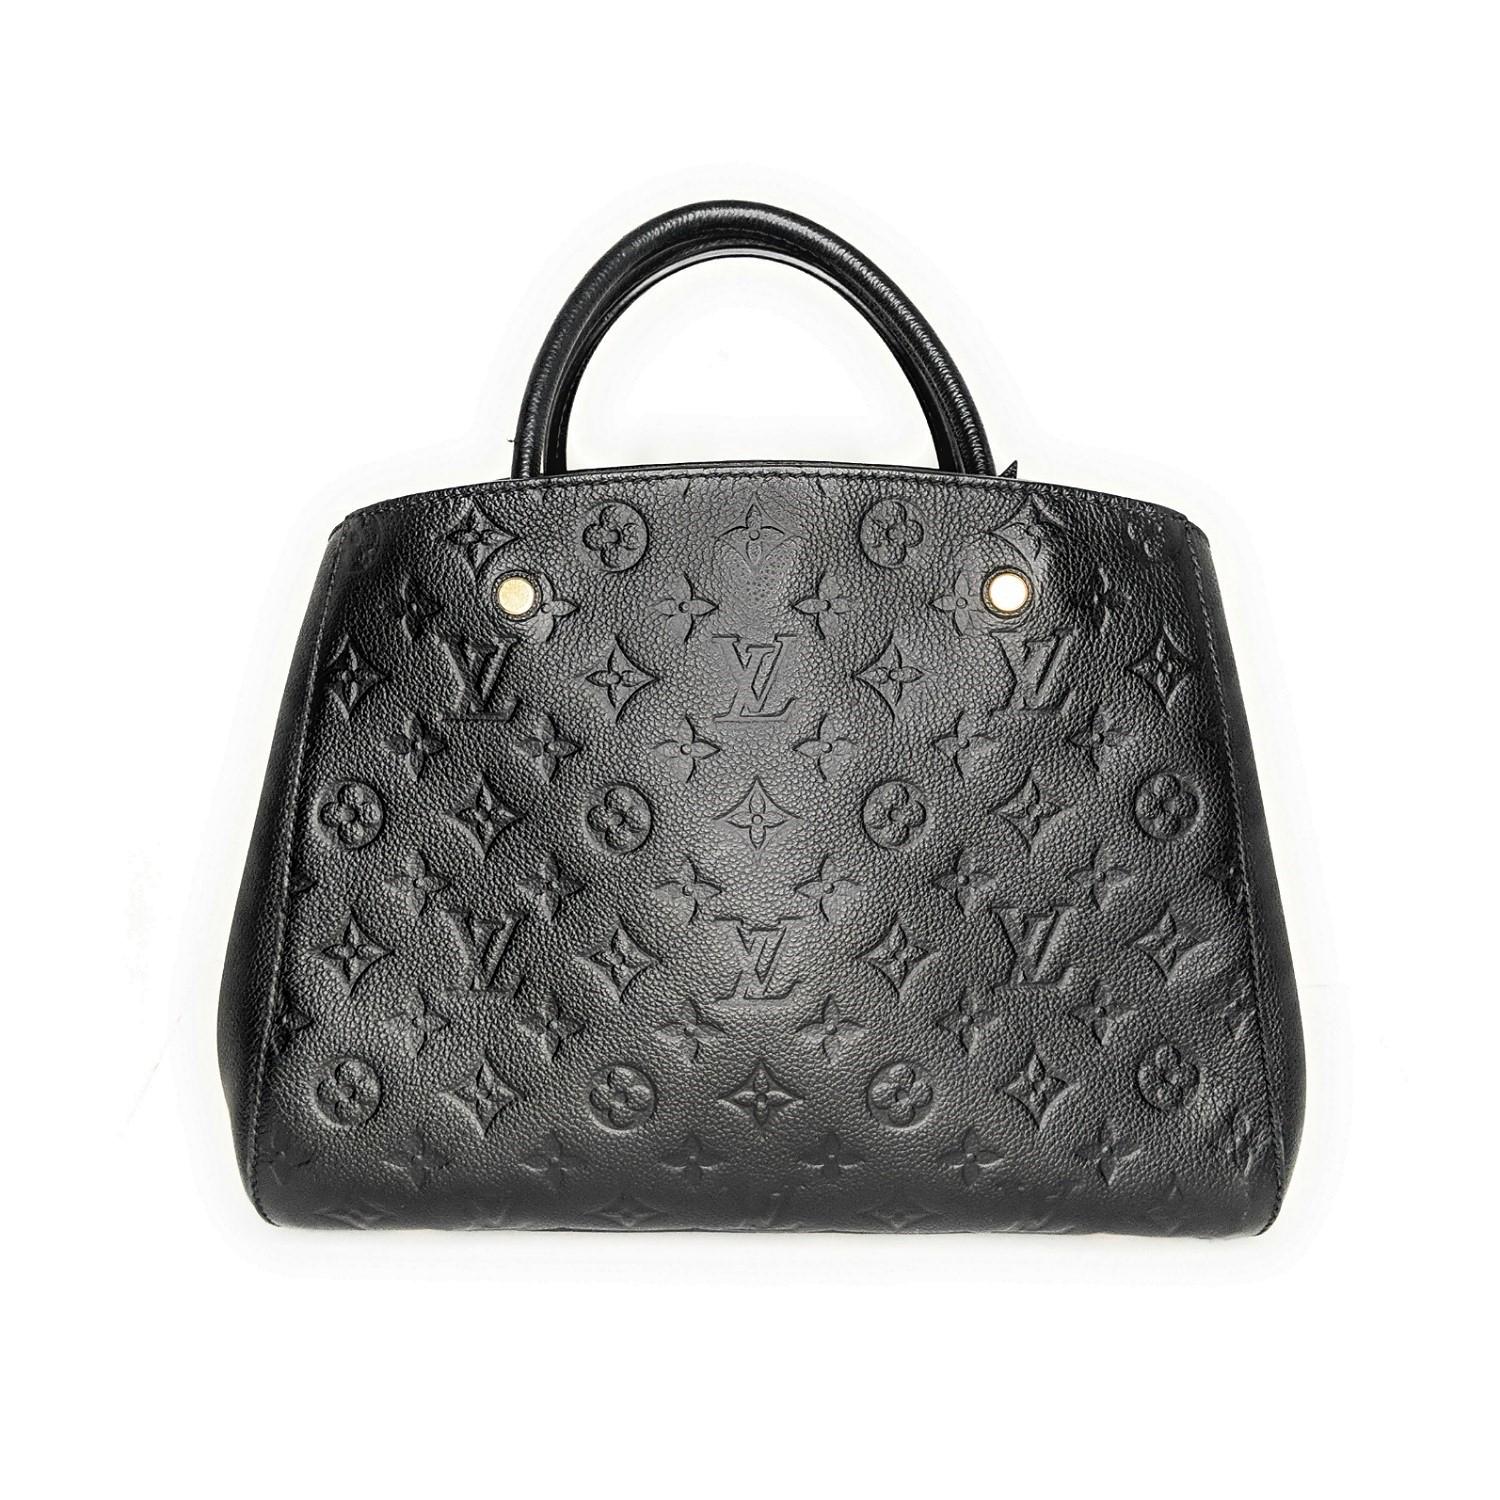 This chic shoulder bag is crafted of Louis Vuitton monogram embossed leather in black. The handbag features rolled leather top handles with brass links, an optional leather shoulder strap with brass clasps, and a broad open-top, revealing a striped